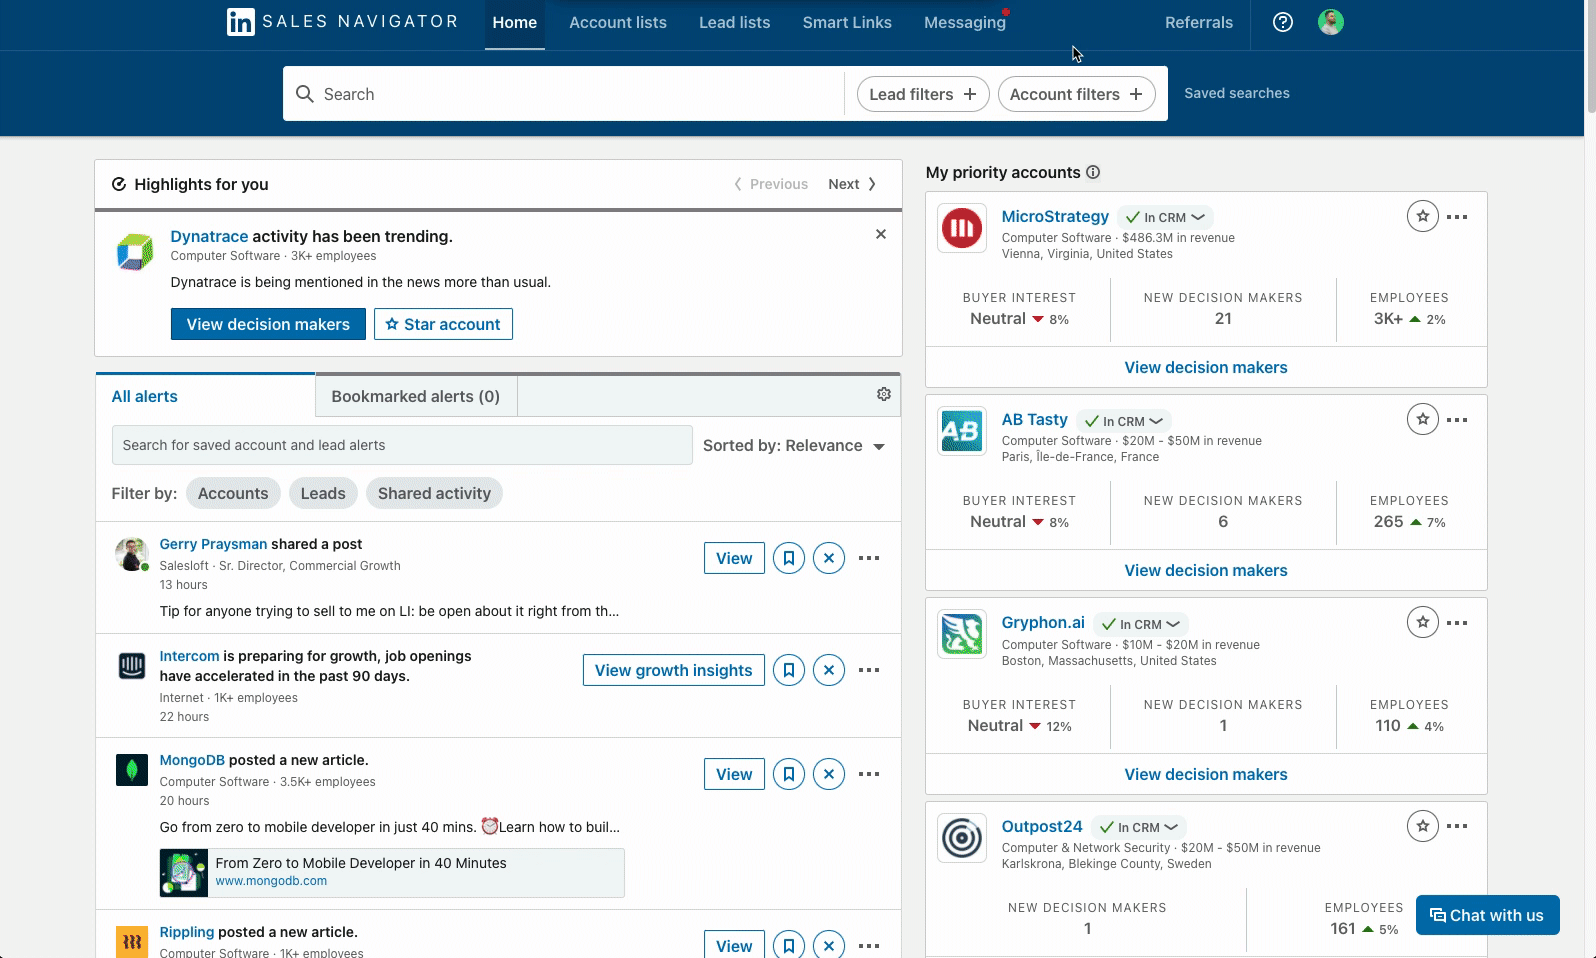 Department & Technographic Search Example Using LinkedIn Sales Navigator